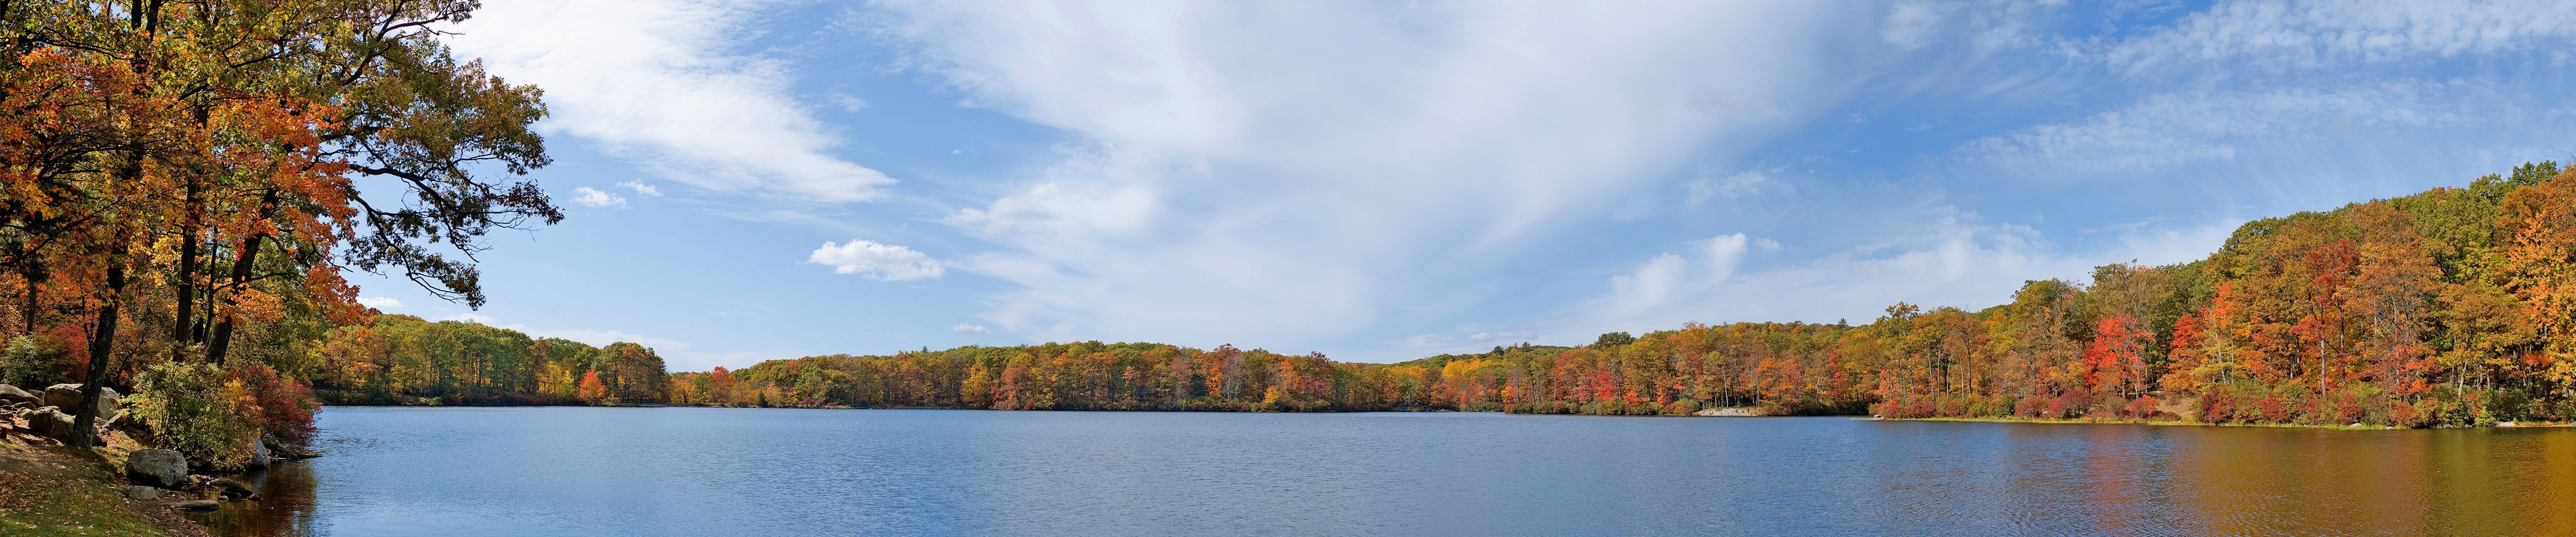 Triple Screen Landscape Wide Angle Lake Forest Fall Red Leaves Wallpaper:5760x1200